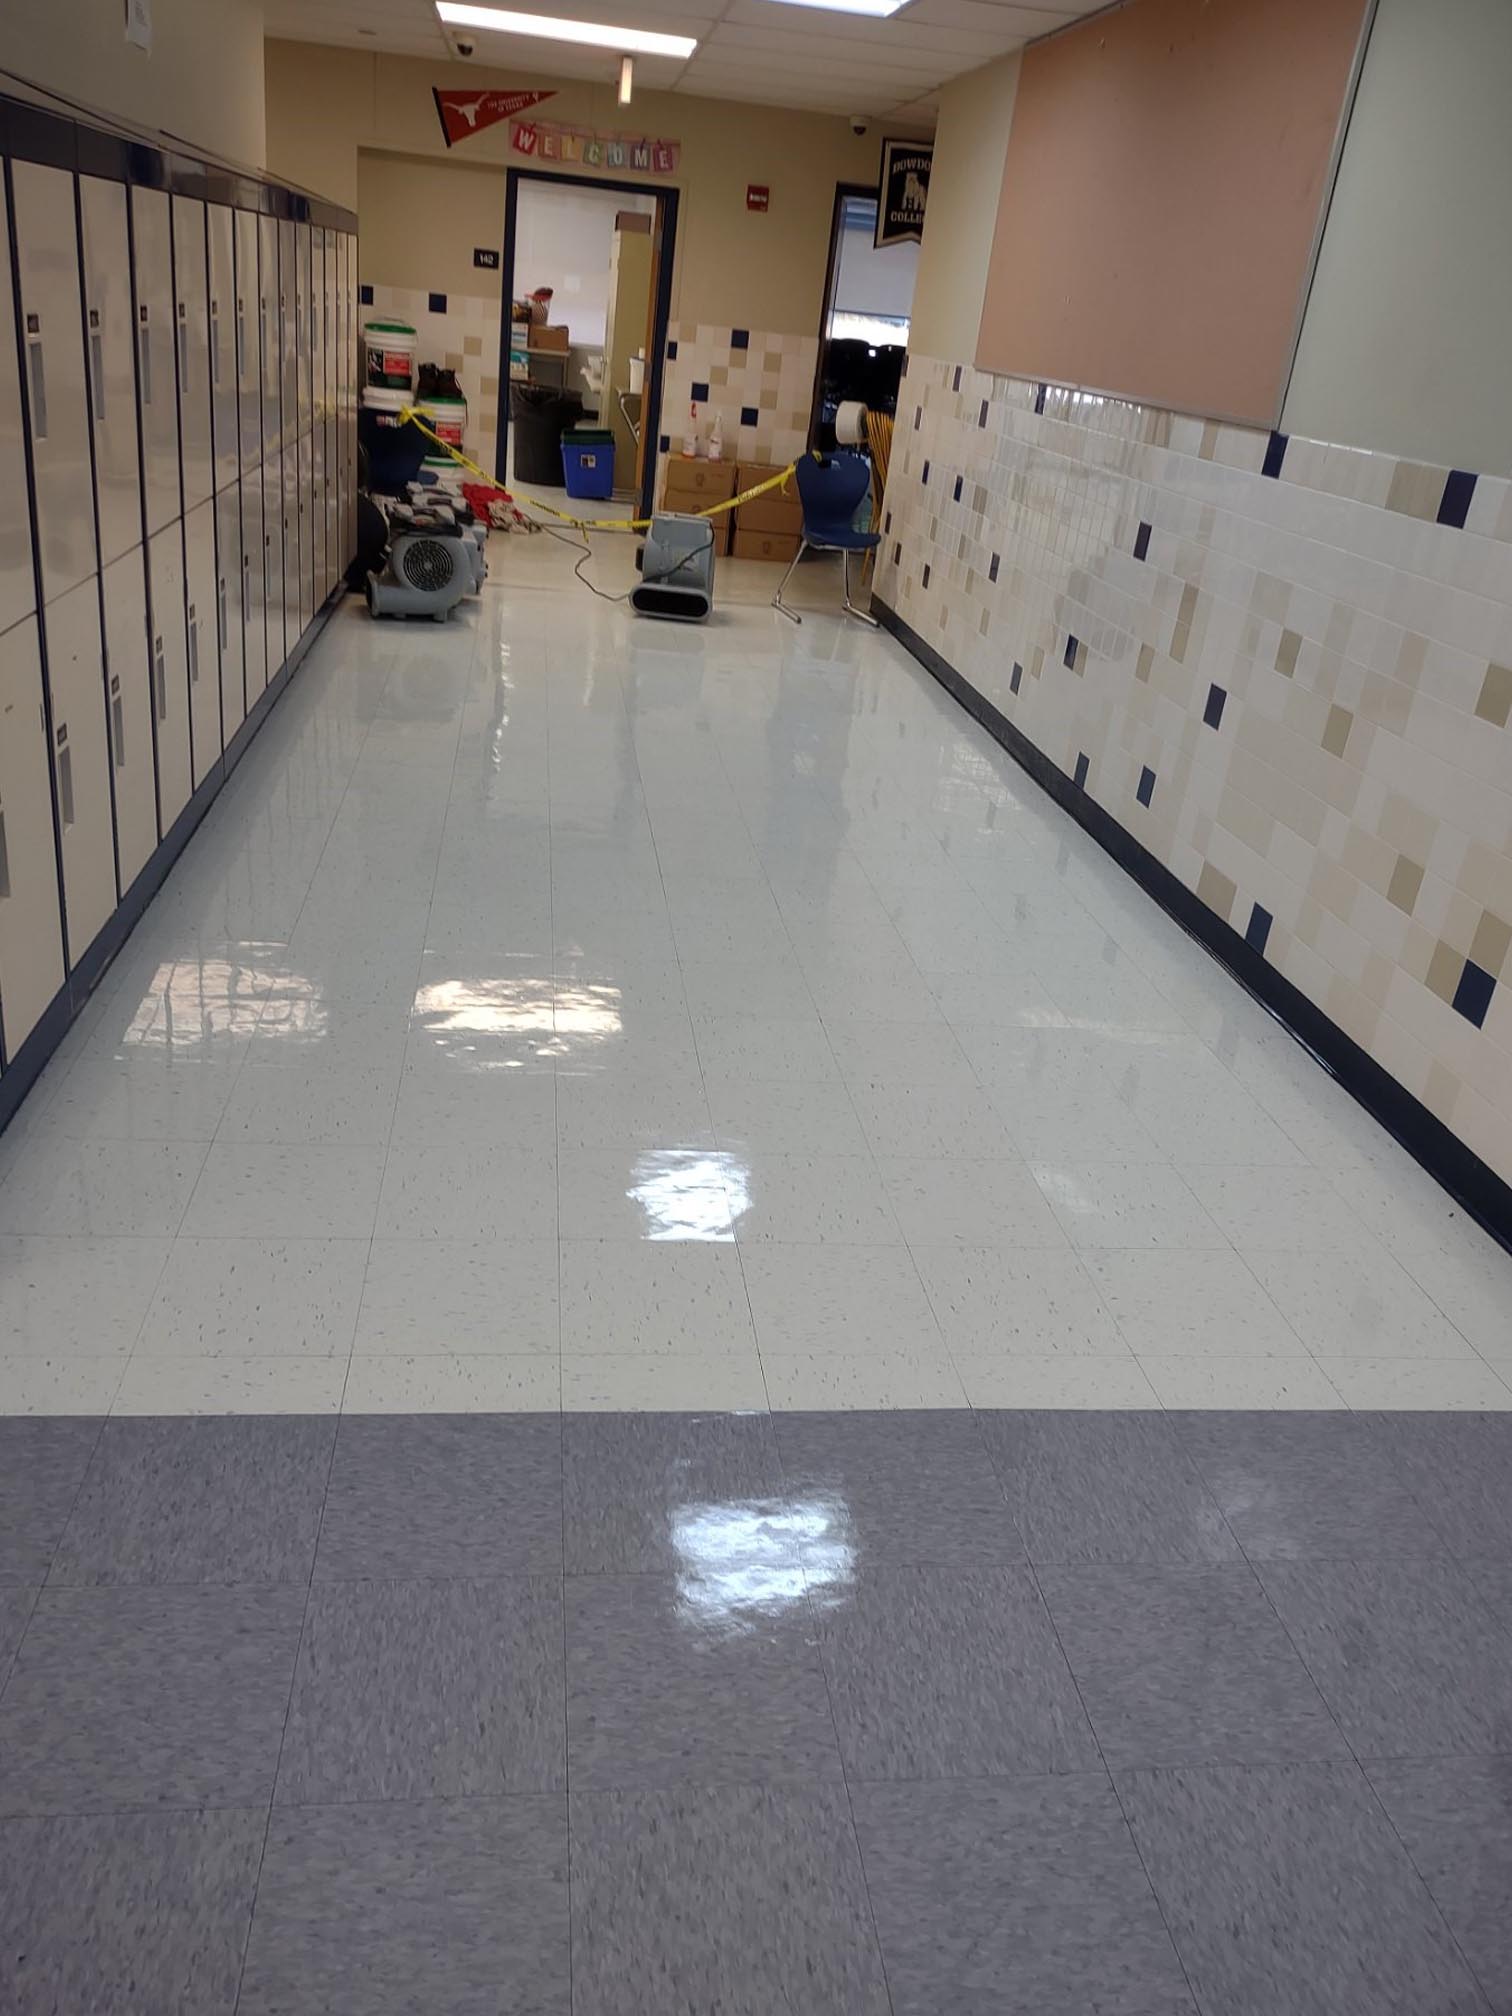 School building cleaning service